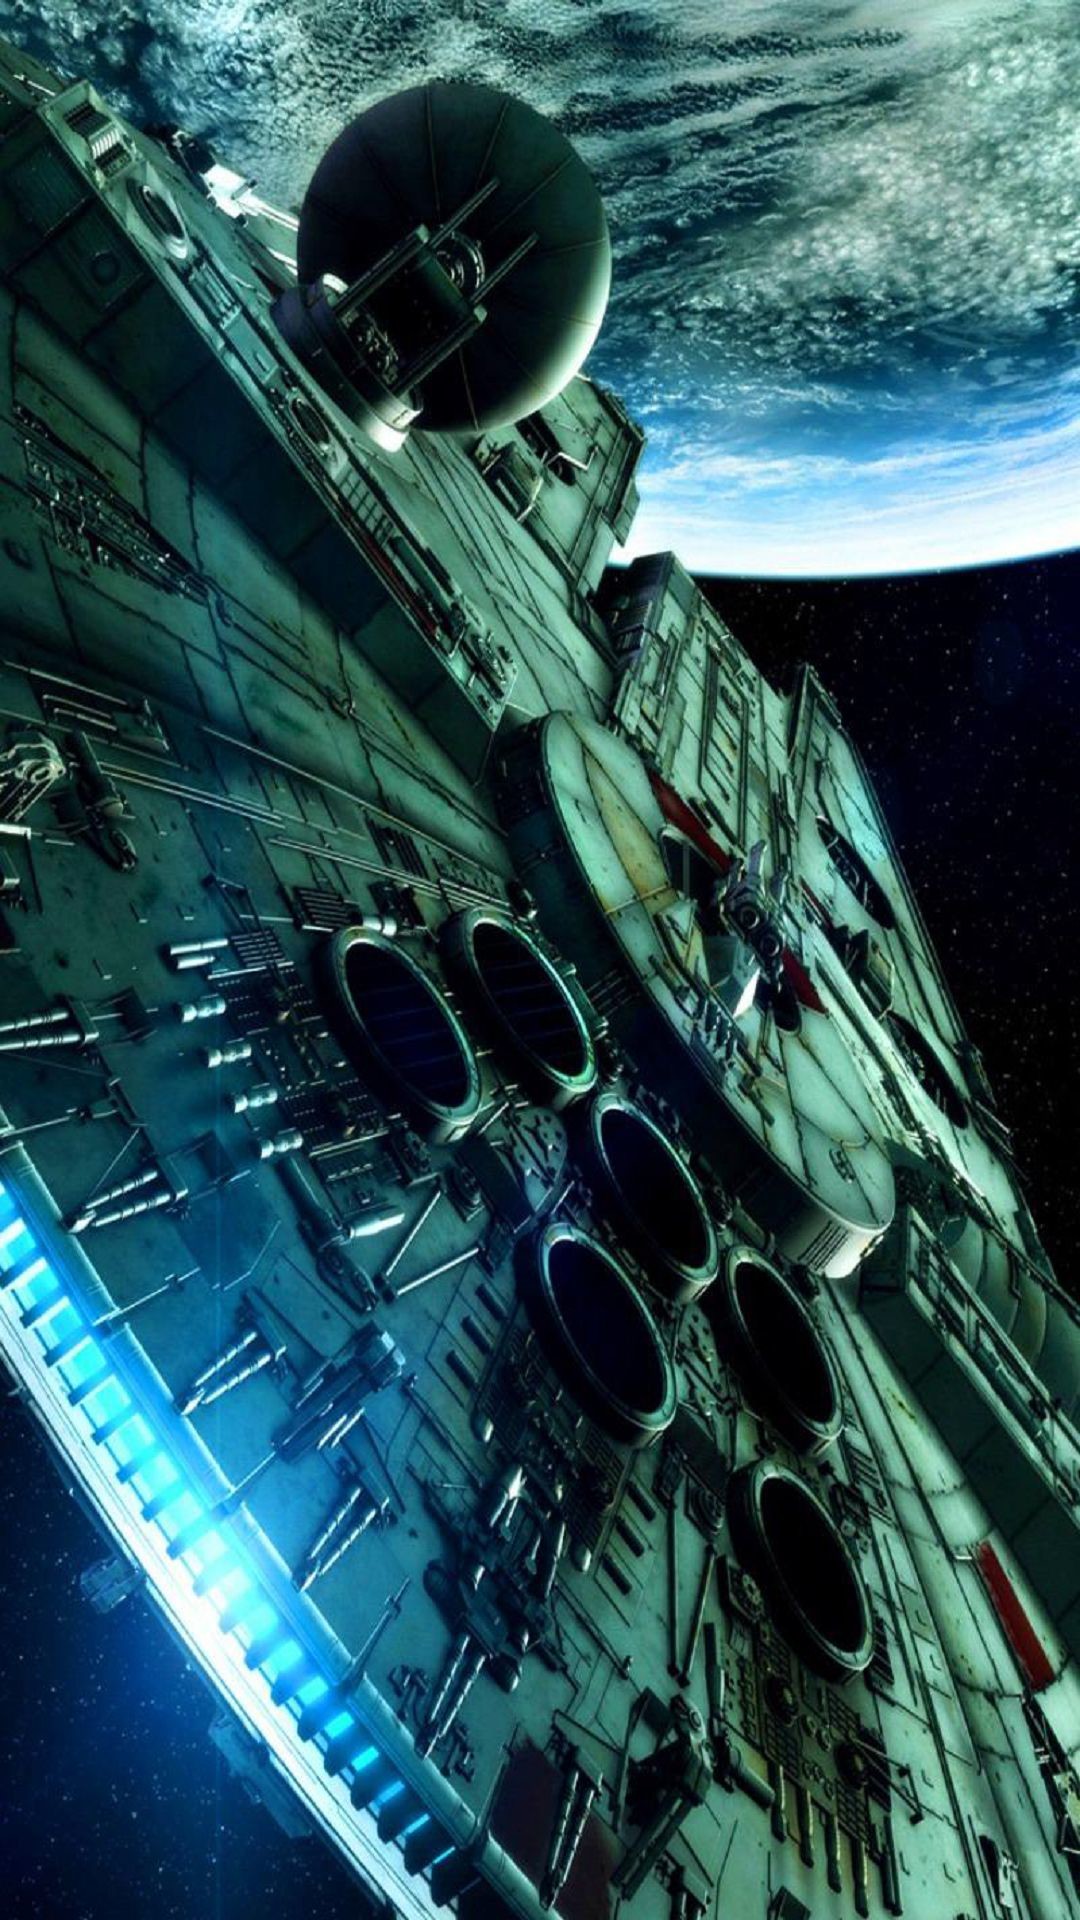 Star Wars wallpapers for iPhone and iPad my iGadget